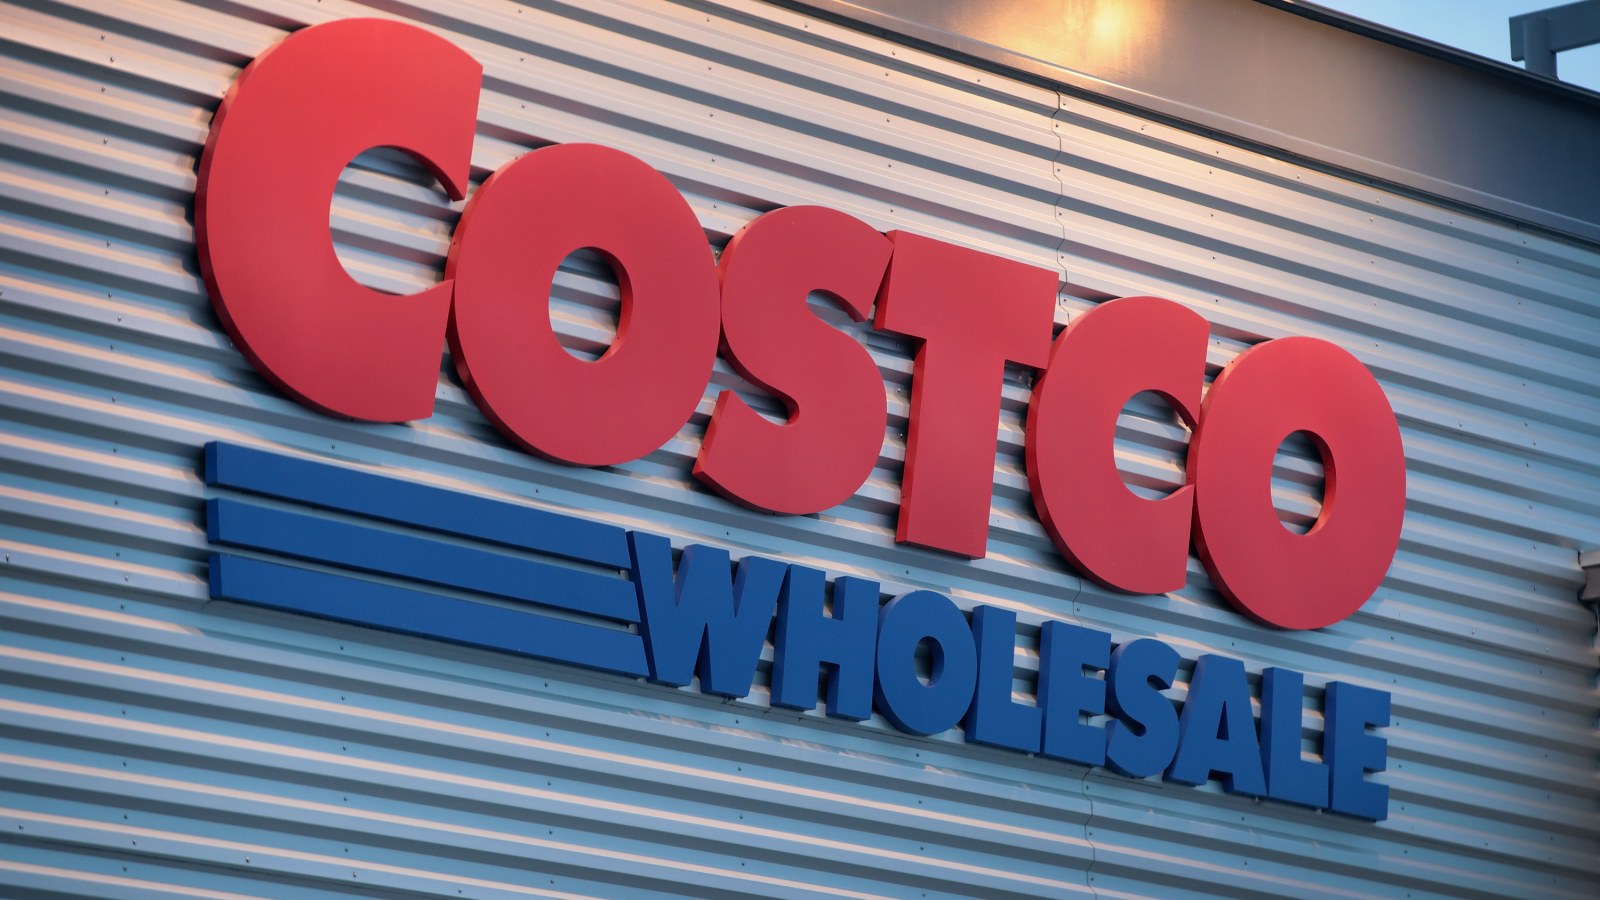 Human Remains Found at Costco Site in California, Police Investigating